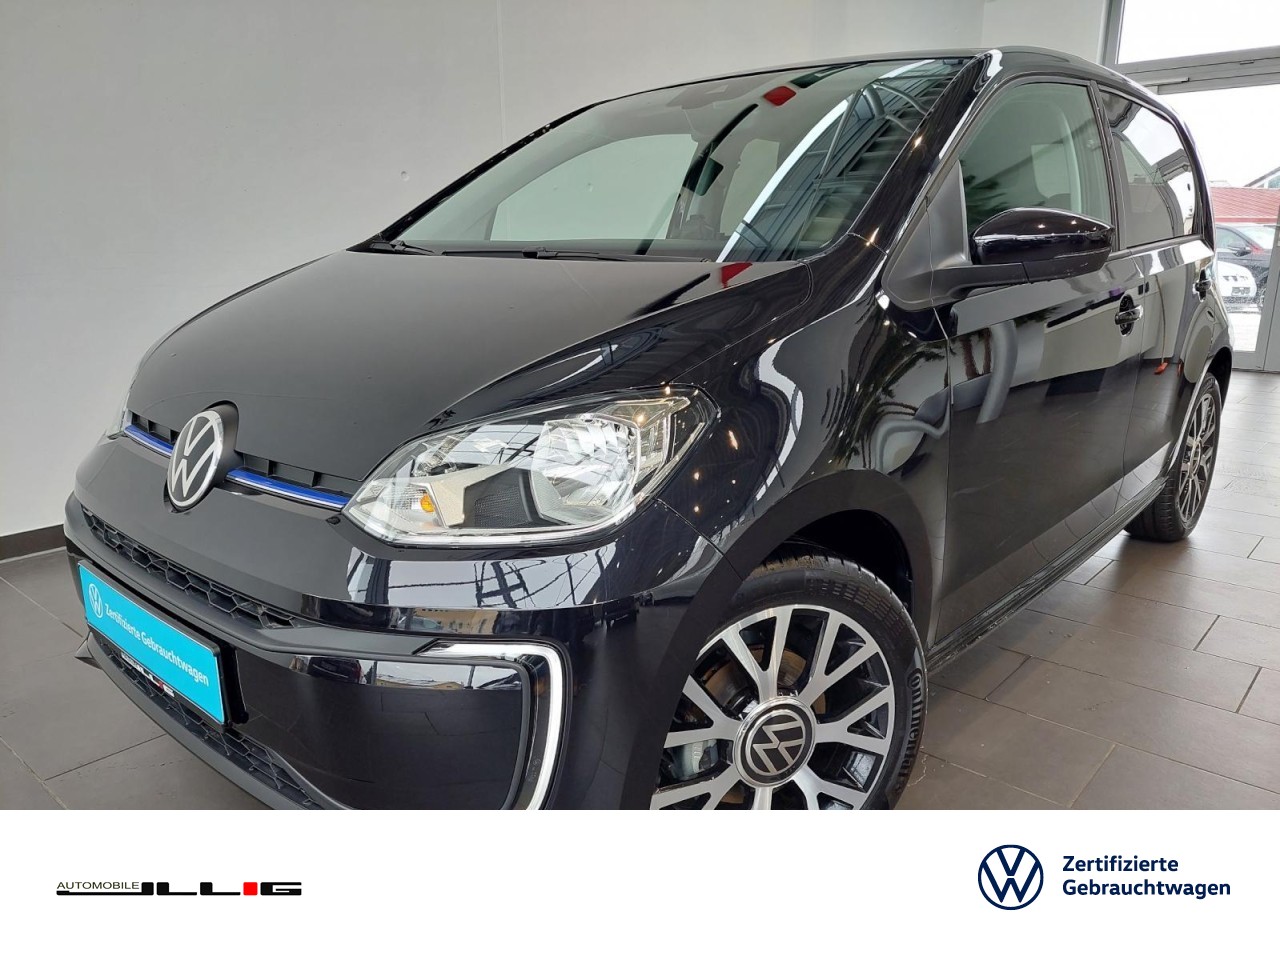 Volkswagen up 2.4 e-up Edition inkl (UPE 385)